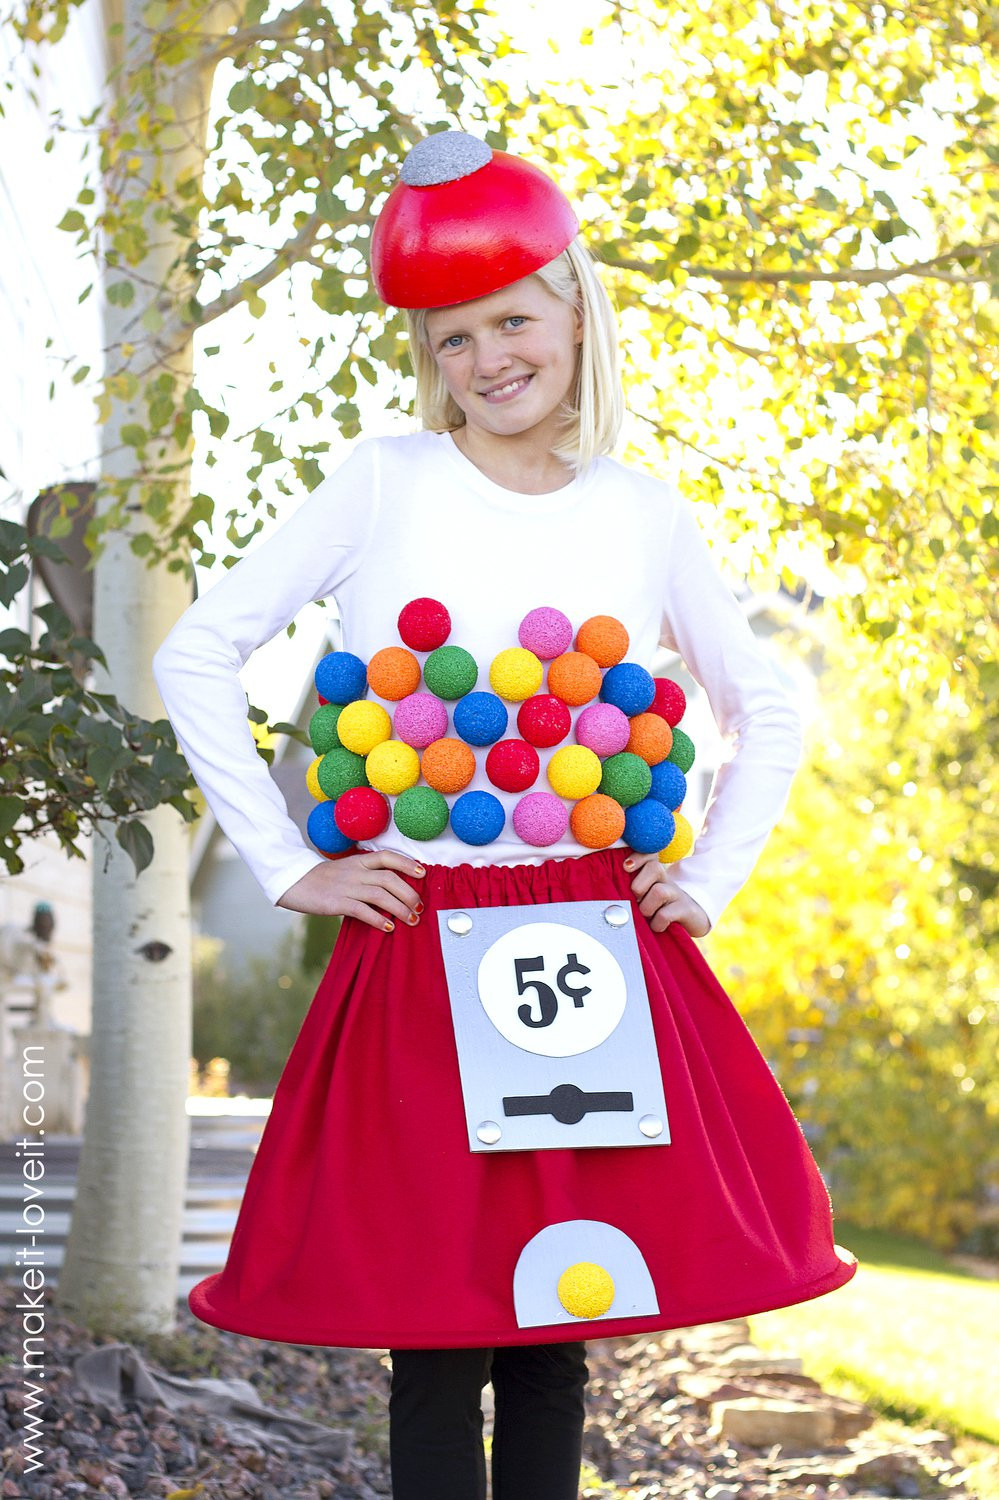 Adult DIY Halloween Costumes
 The 15 Best DIY Halloween Costumes for Adults